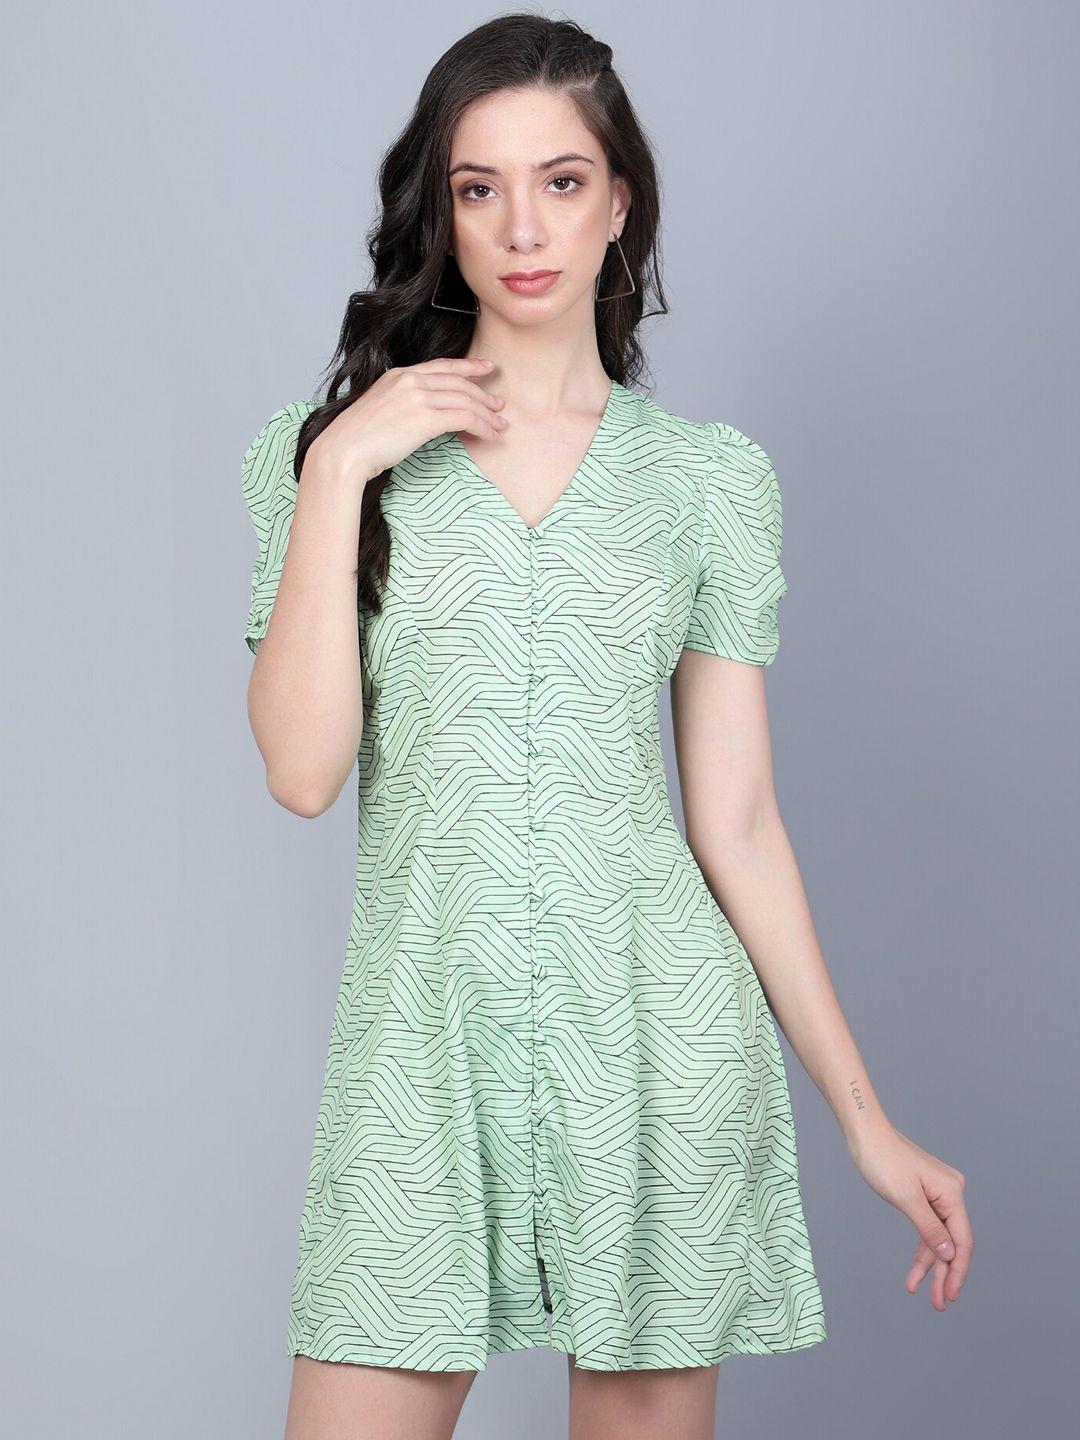 the-roadster-lifestyle-co.-green-geometric-printed-v-neck-smocked-a-line-mini-dress